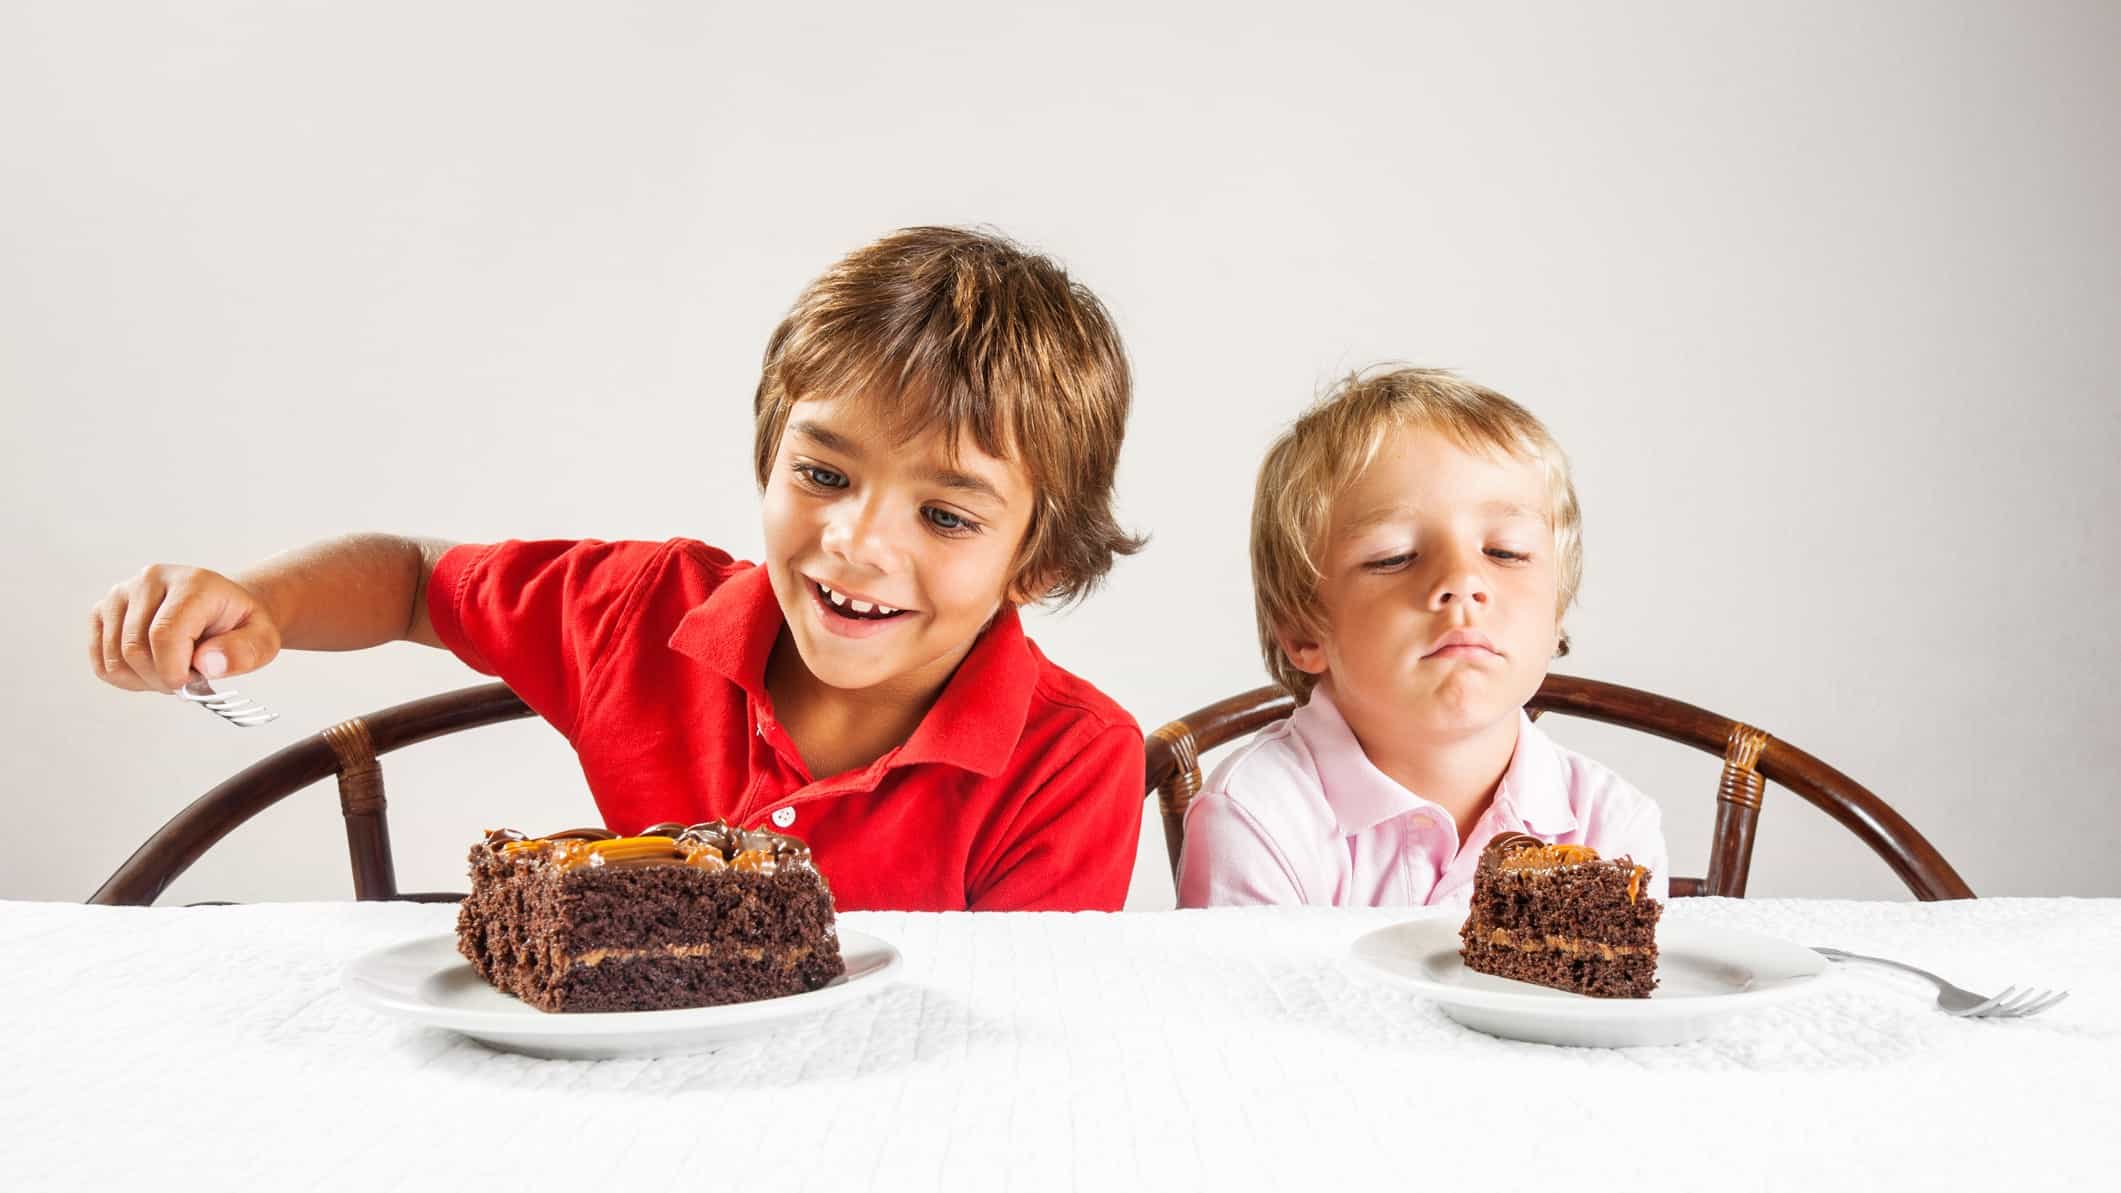 Two young boys each have a piece of chocolate cake, but one piece is bigger than the other.